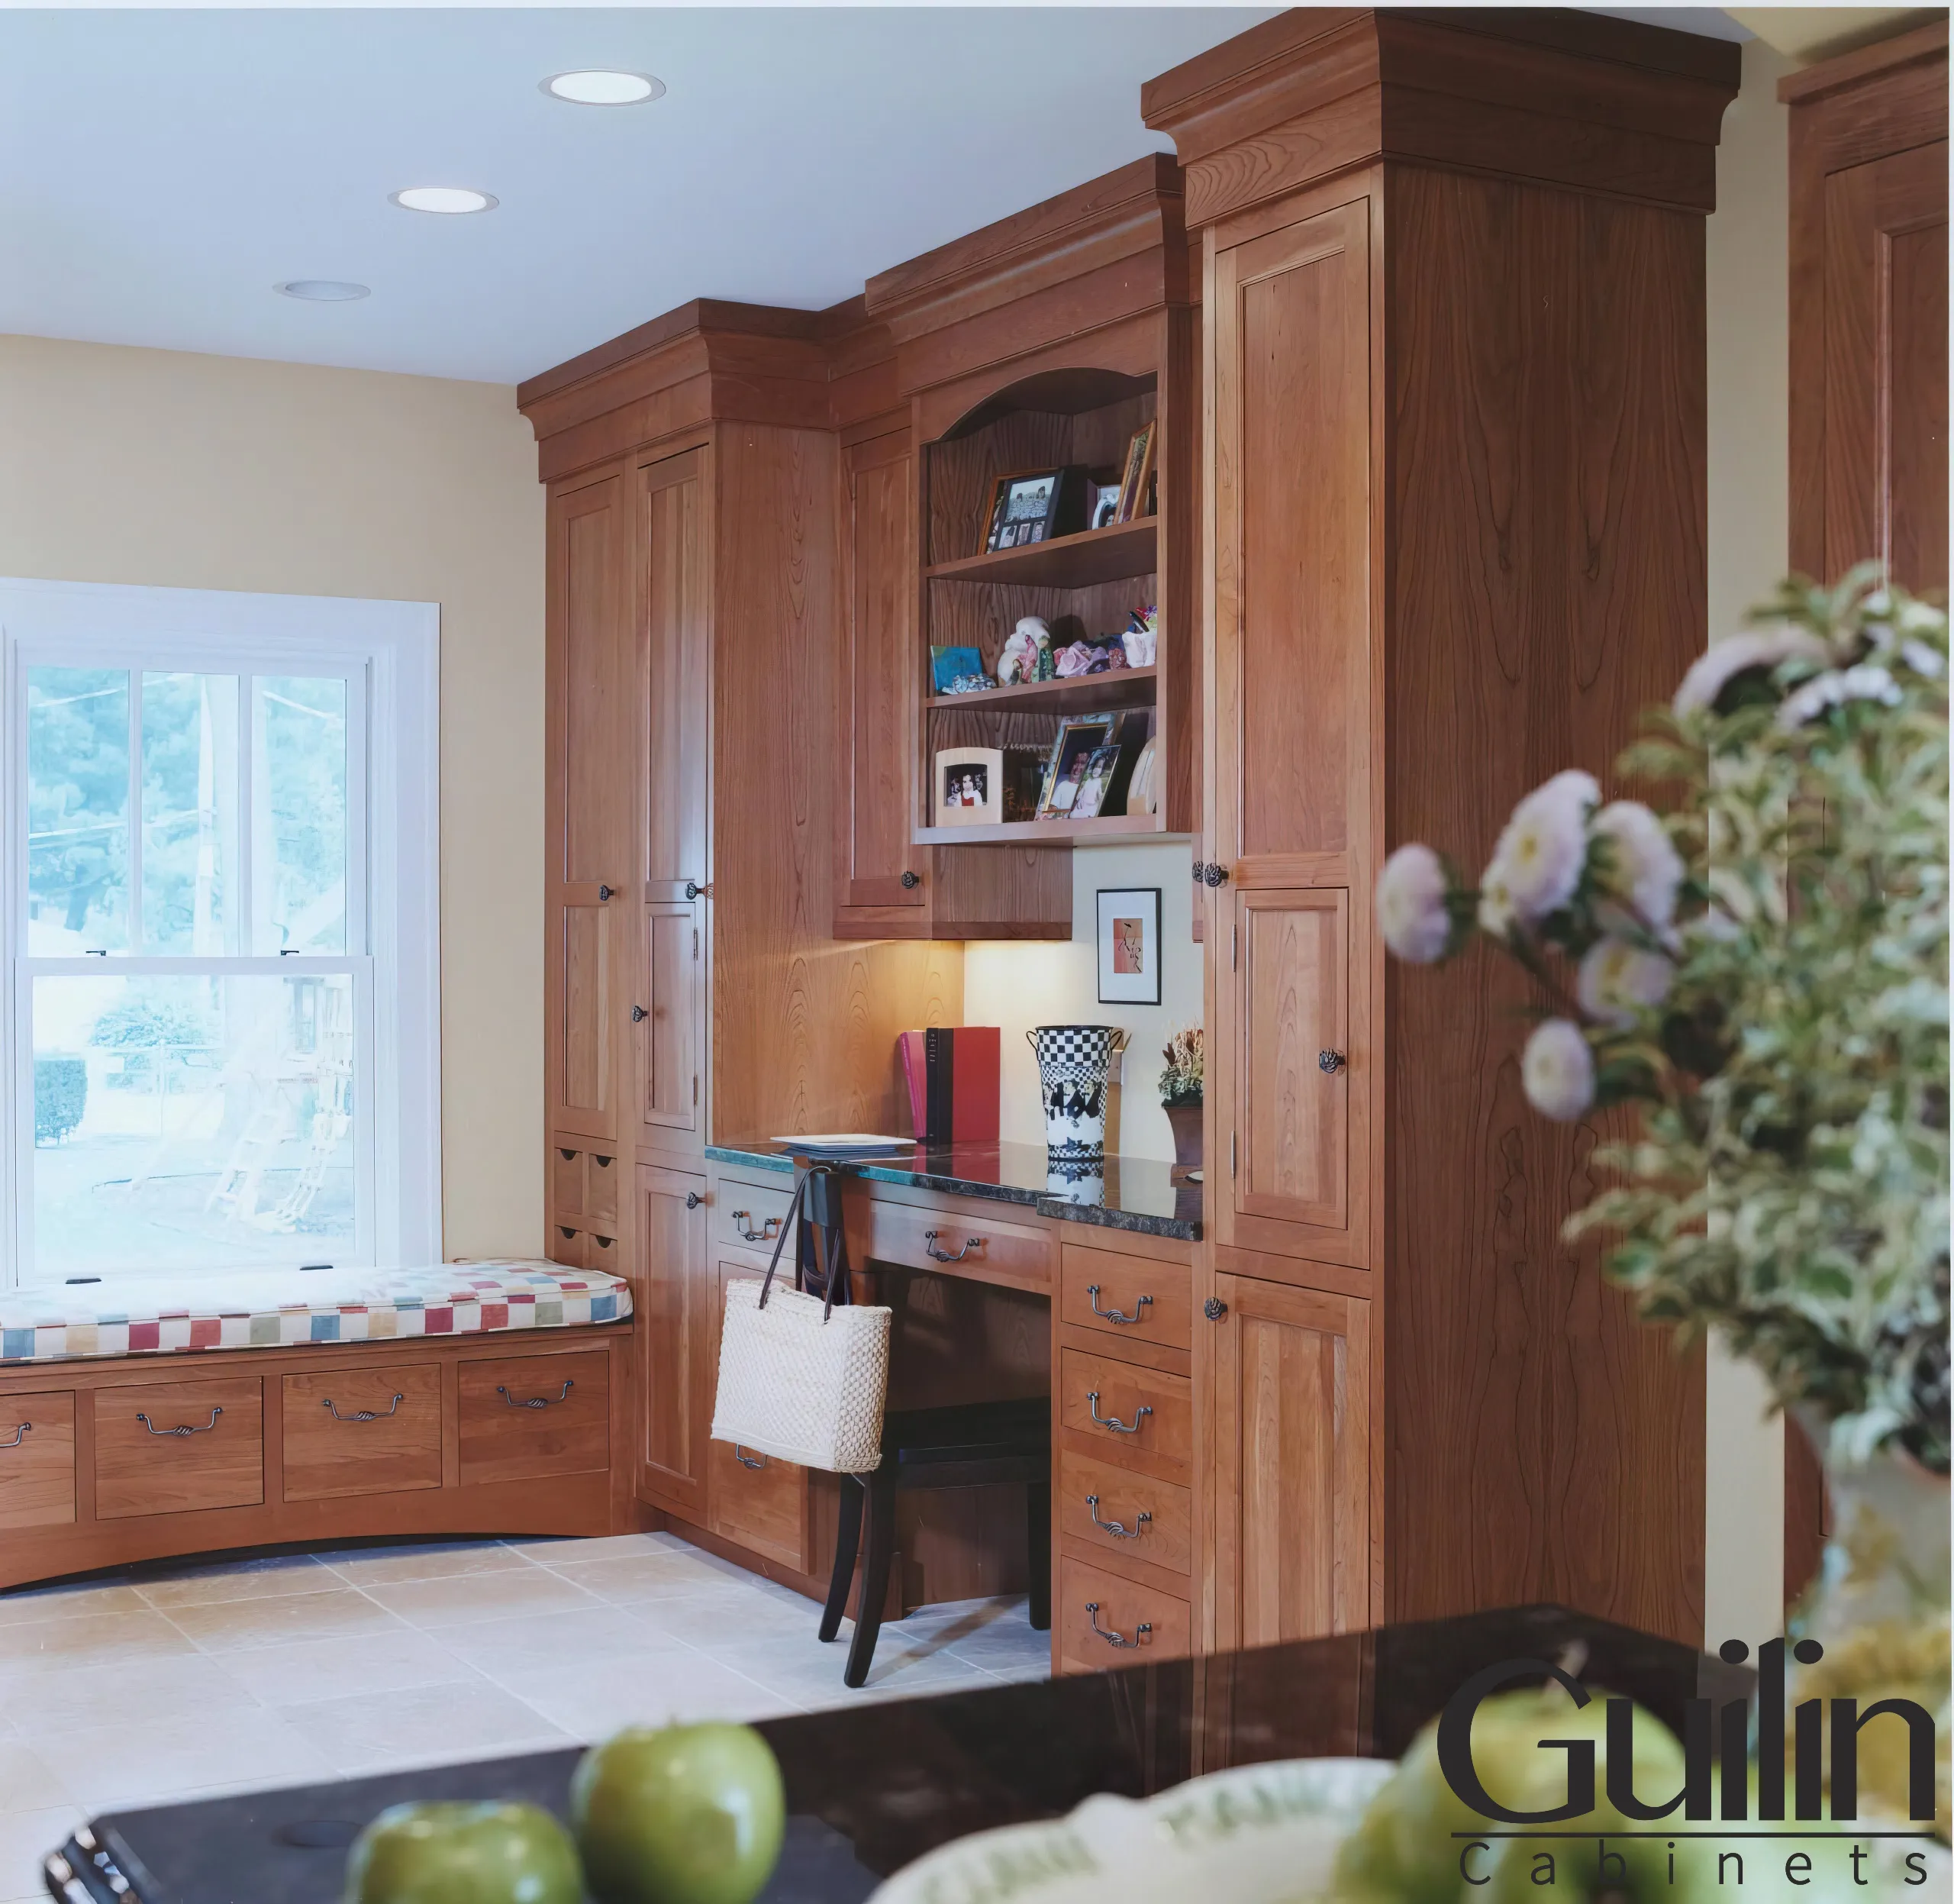 Solid wood cabinets offer an elegant, luxurious look that can add character and charm to your kitchen.